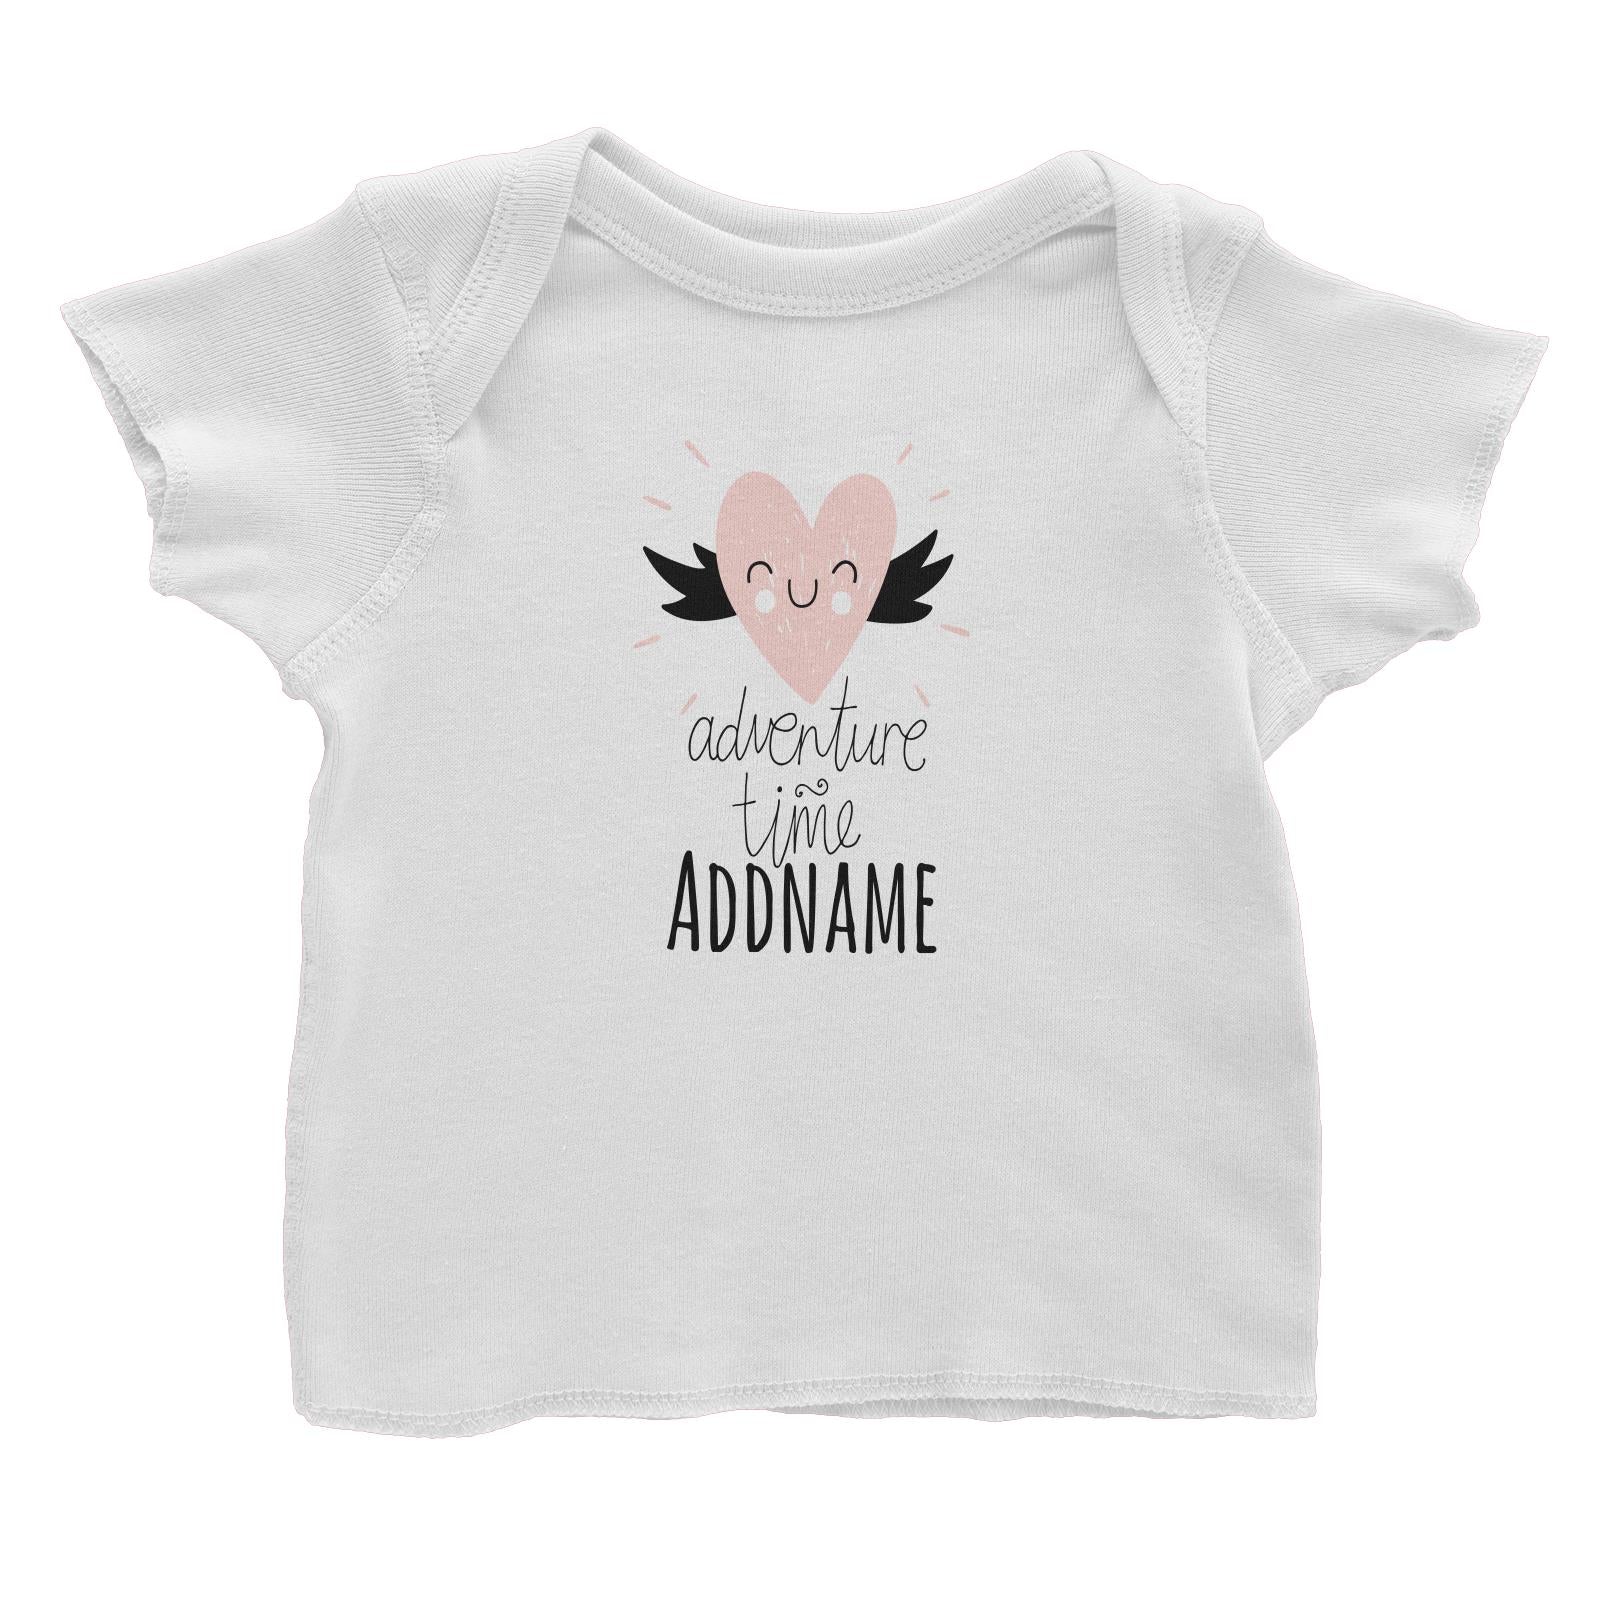 Drawn Newborn Element Adventure Time Heart Wings Addname Baby T-Shirt